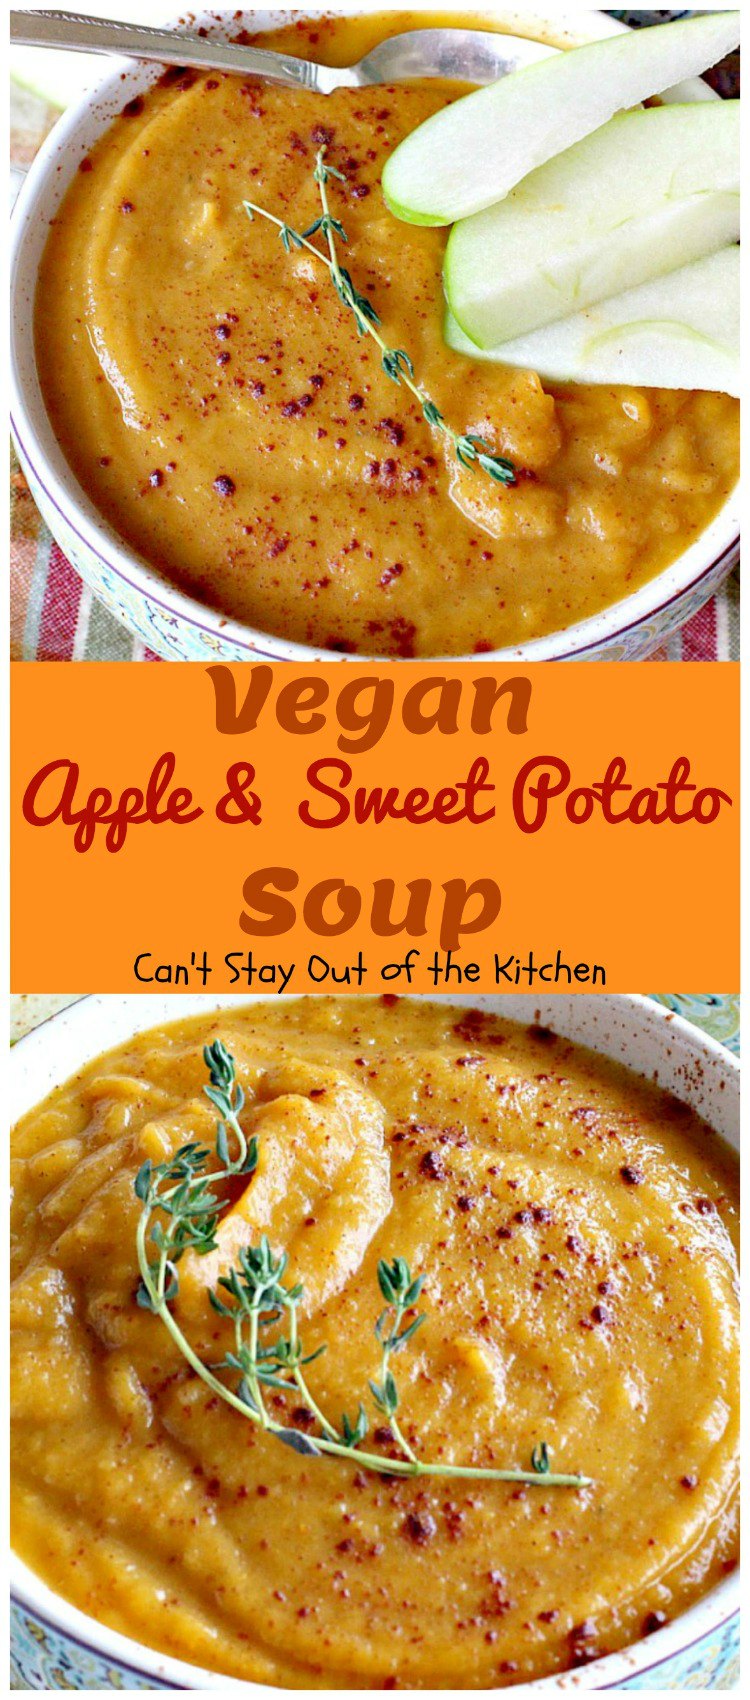 Vegan Apple & Sweet Potato Soup | Can't Stay Out of the Kitchen